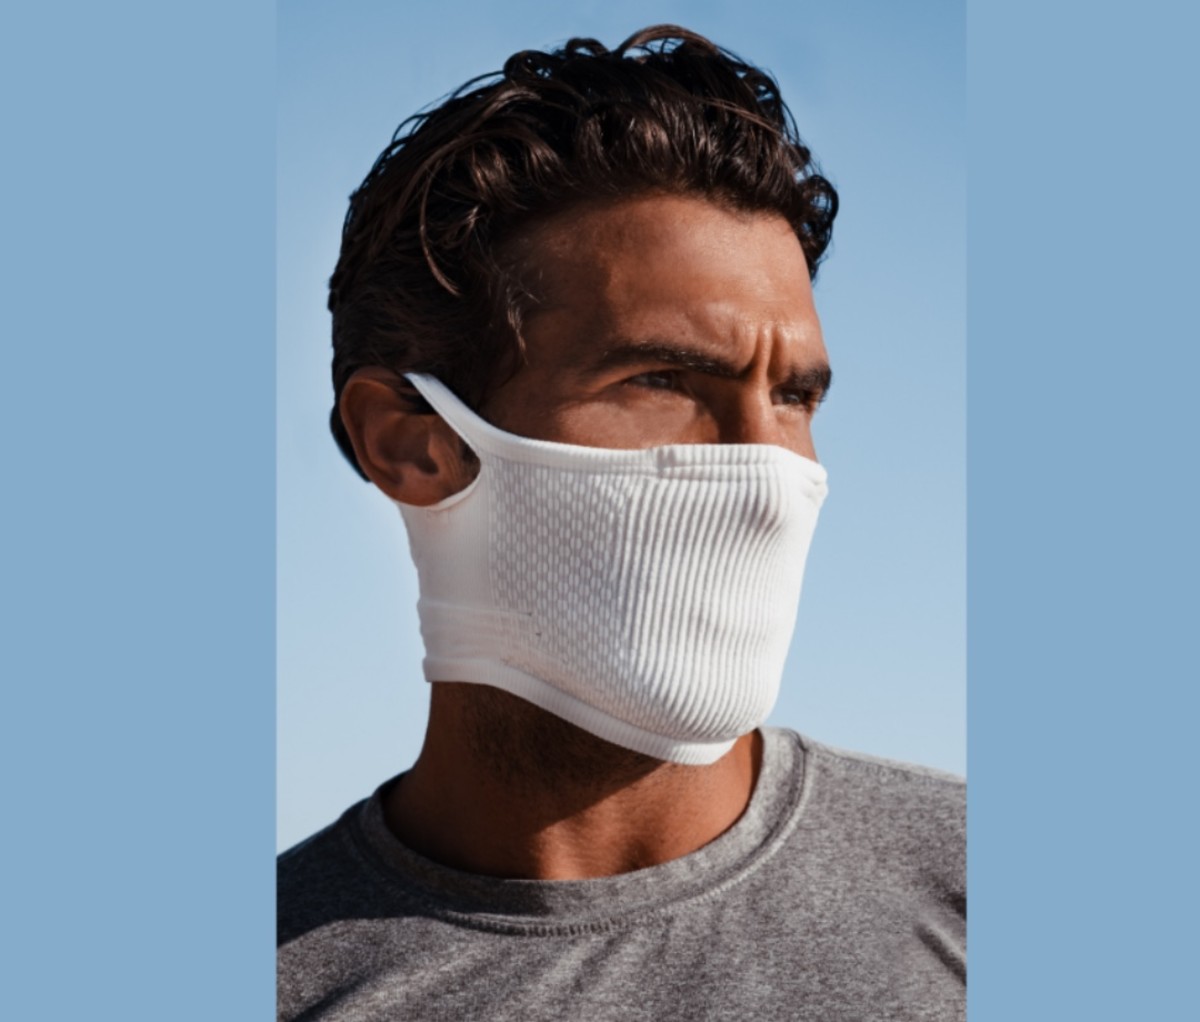 White Mesh Mask With HALO Nanofilter™ Technology